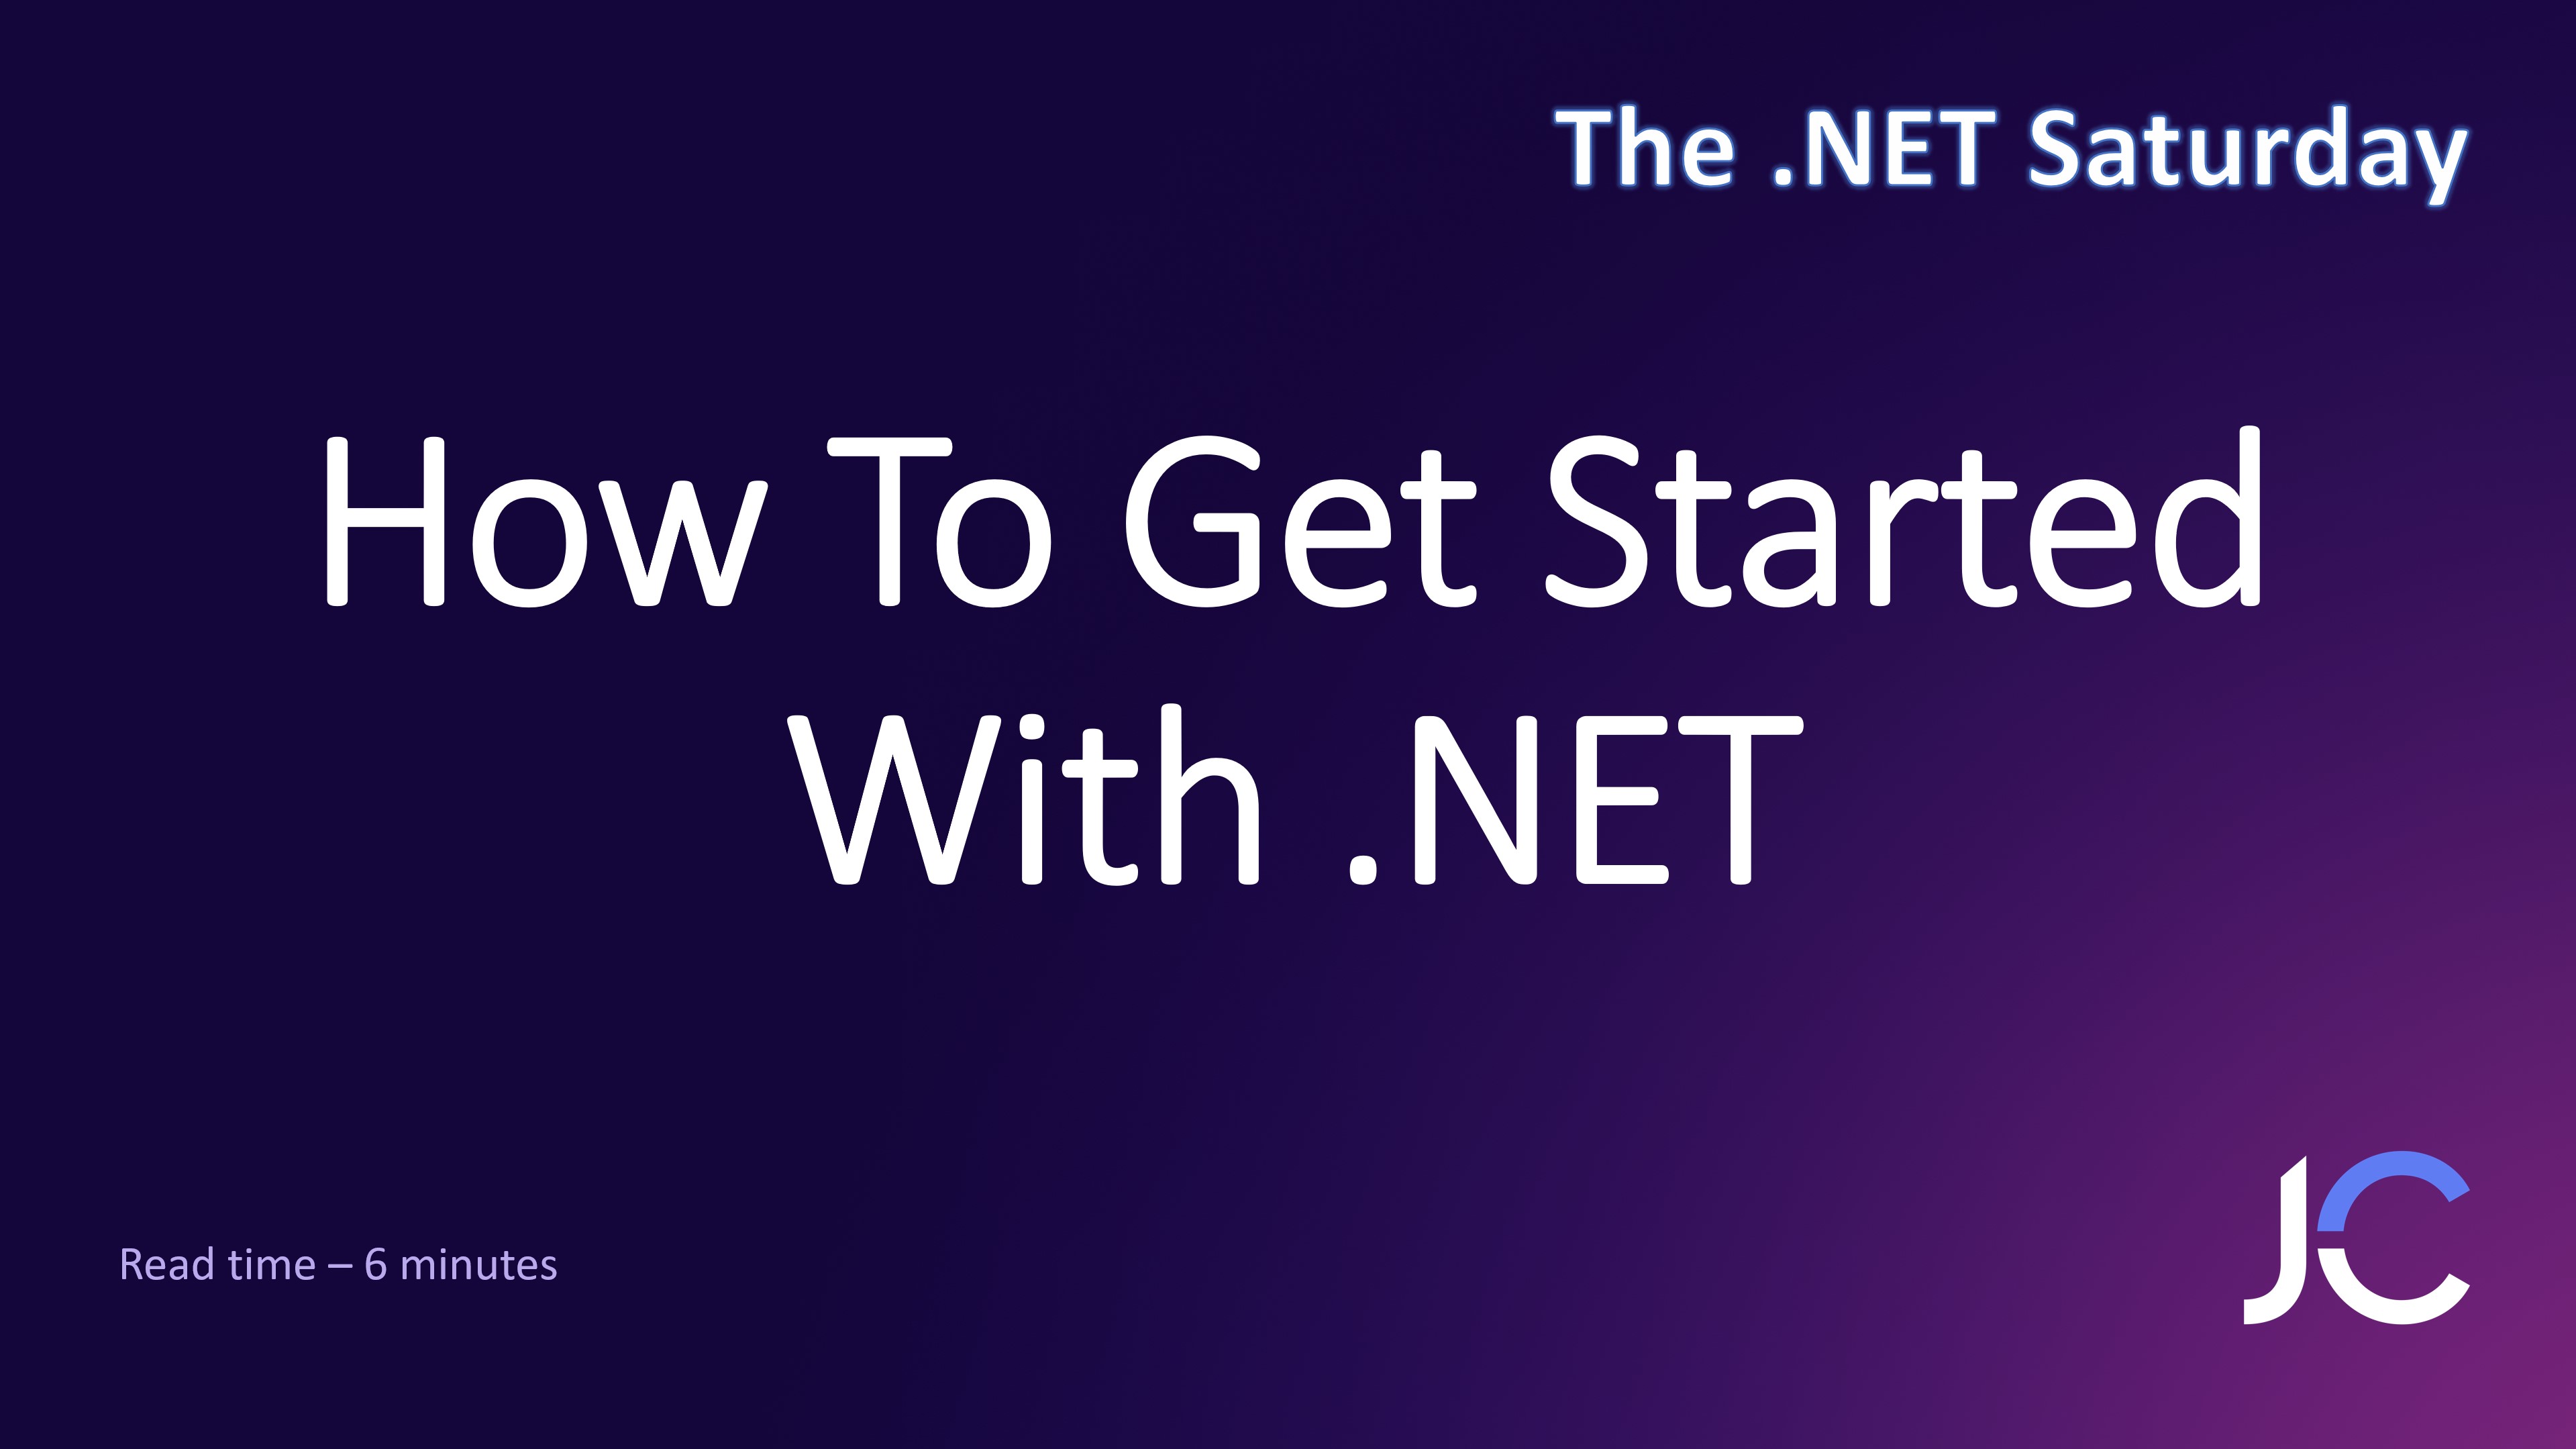 How To Get Started With .NET